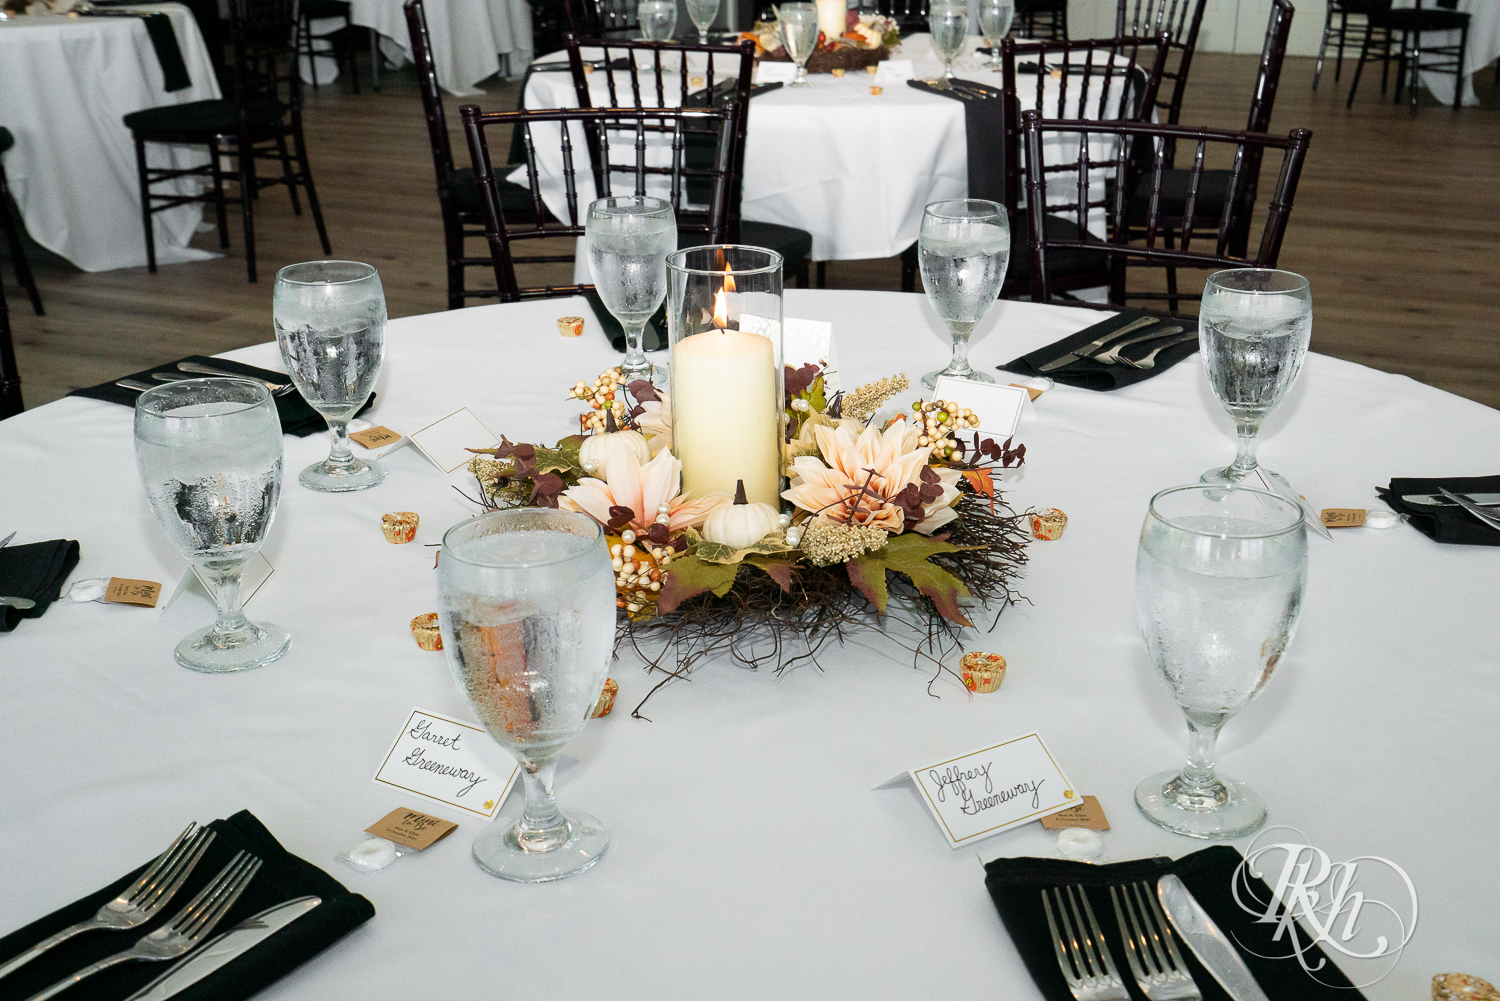 Wedding reception setup at Hastings Golf Club in Hastings, Minnesota with fall accents